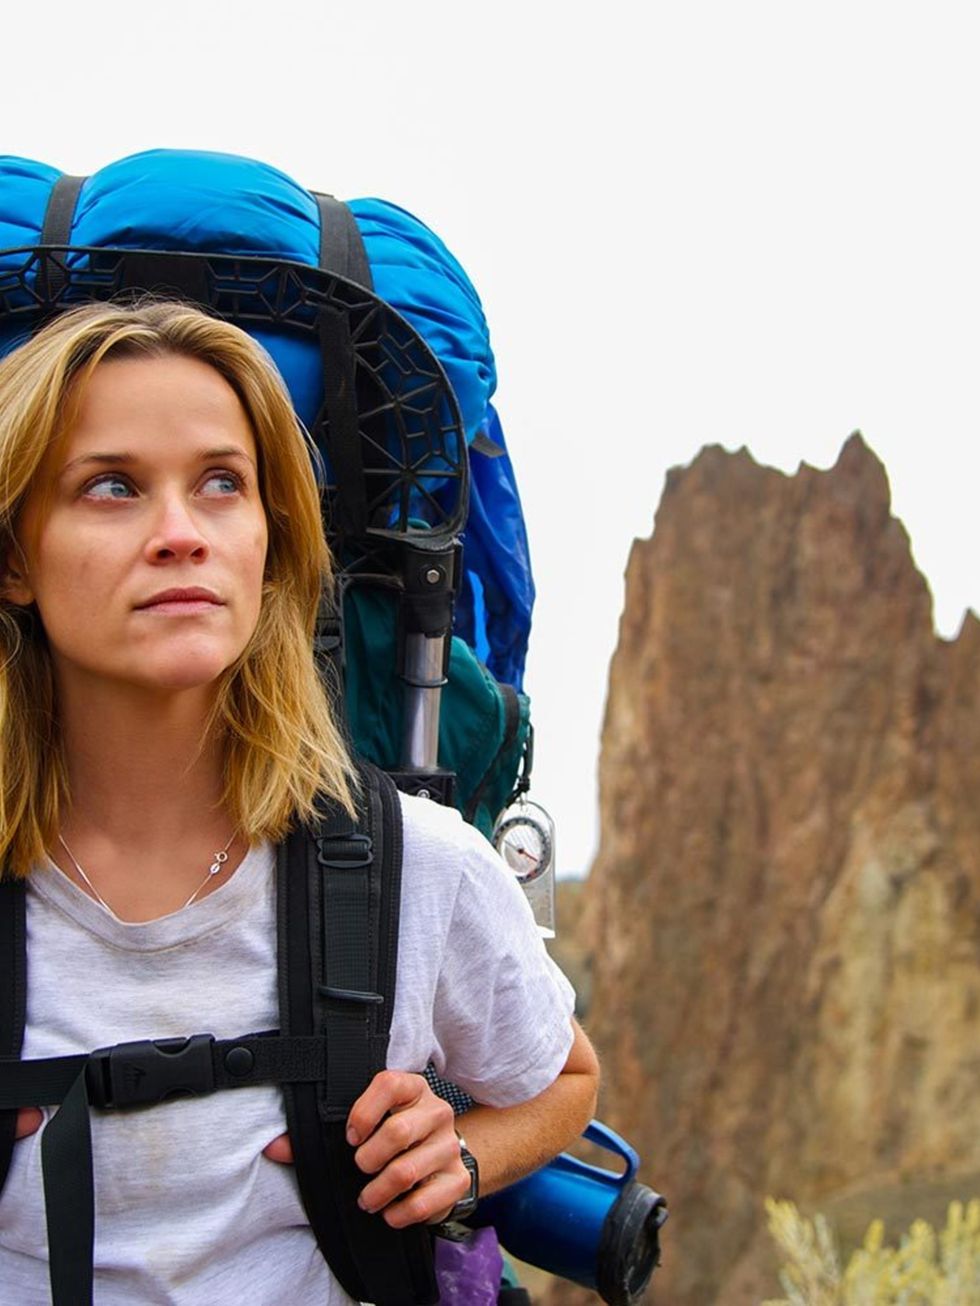 <p><strong>FILM: Wild</strong></p>

<p>Based on a true story, Reese Witherspoon stars in this gritty drama as a woman trying to come to terms with loss and drug addiction by undertaking a daunting 1,100-mile hike along the Pacific Crest Trail.</p>

<p>A c